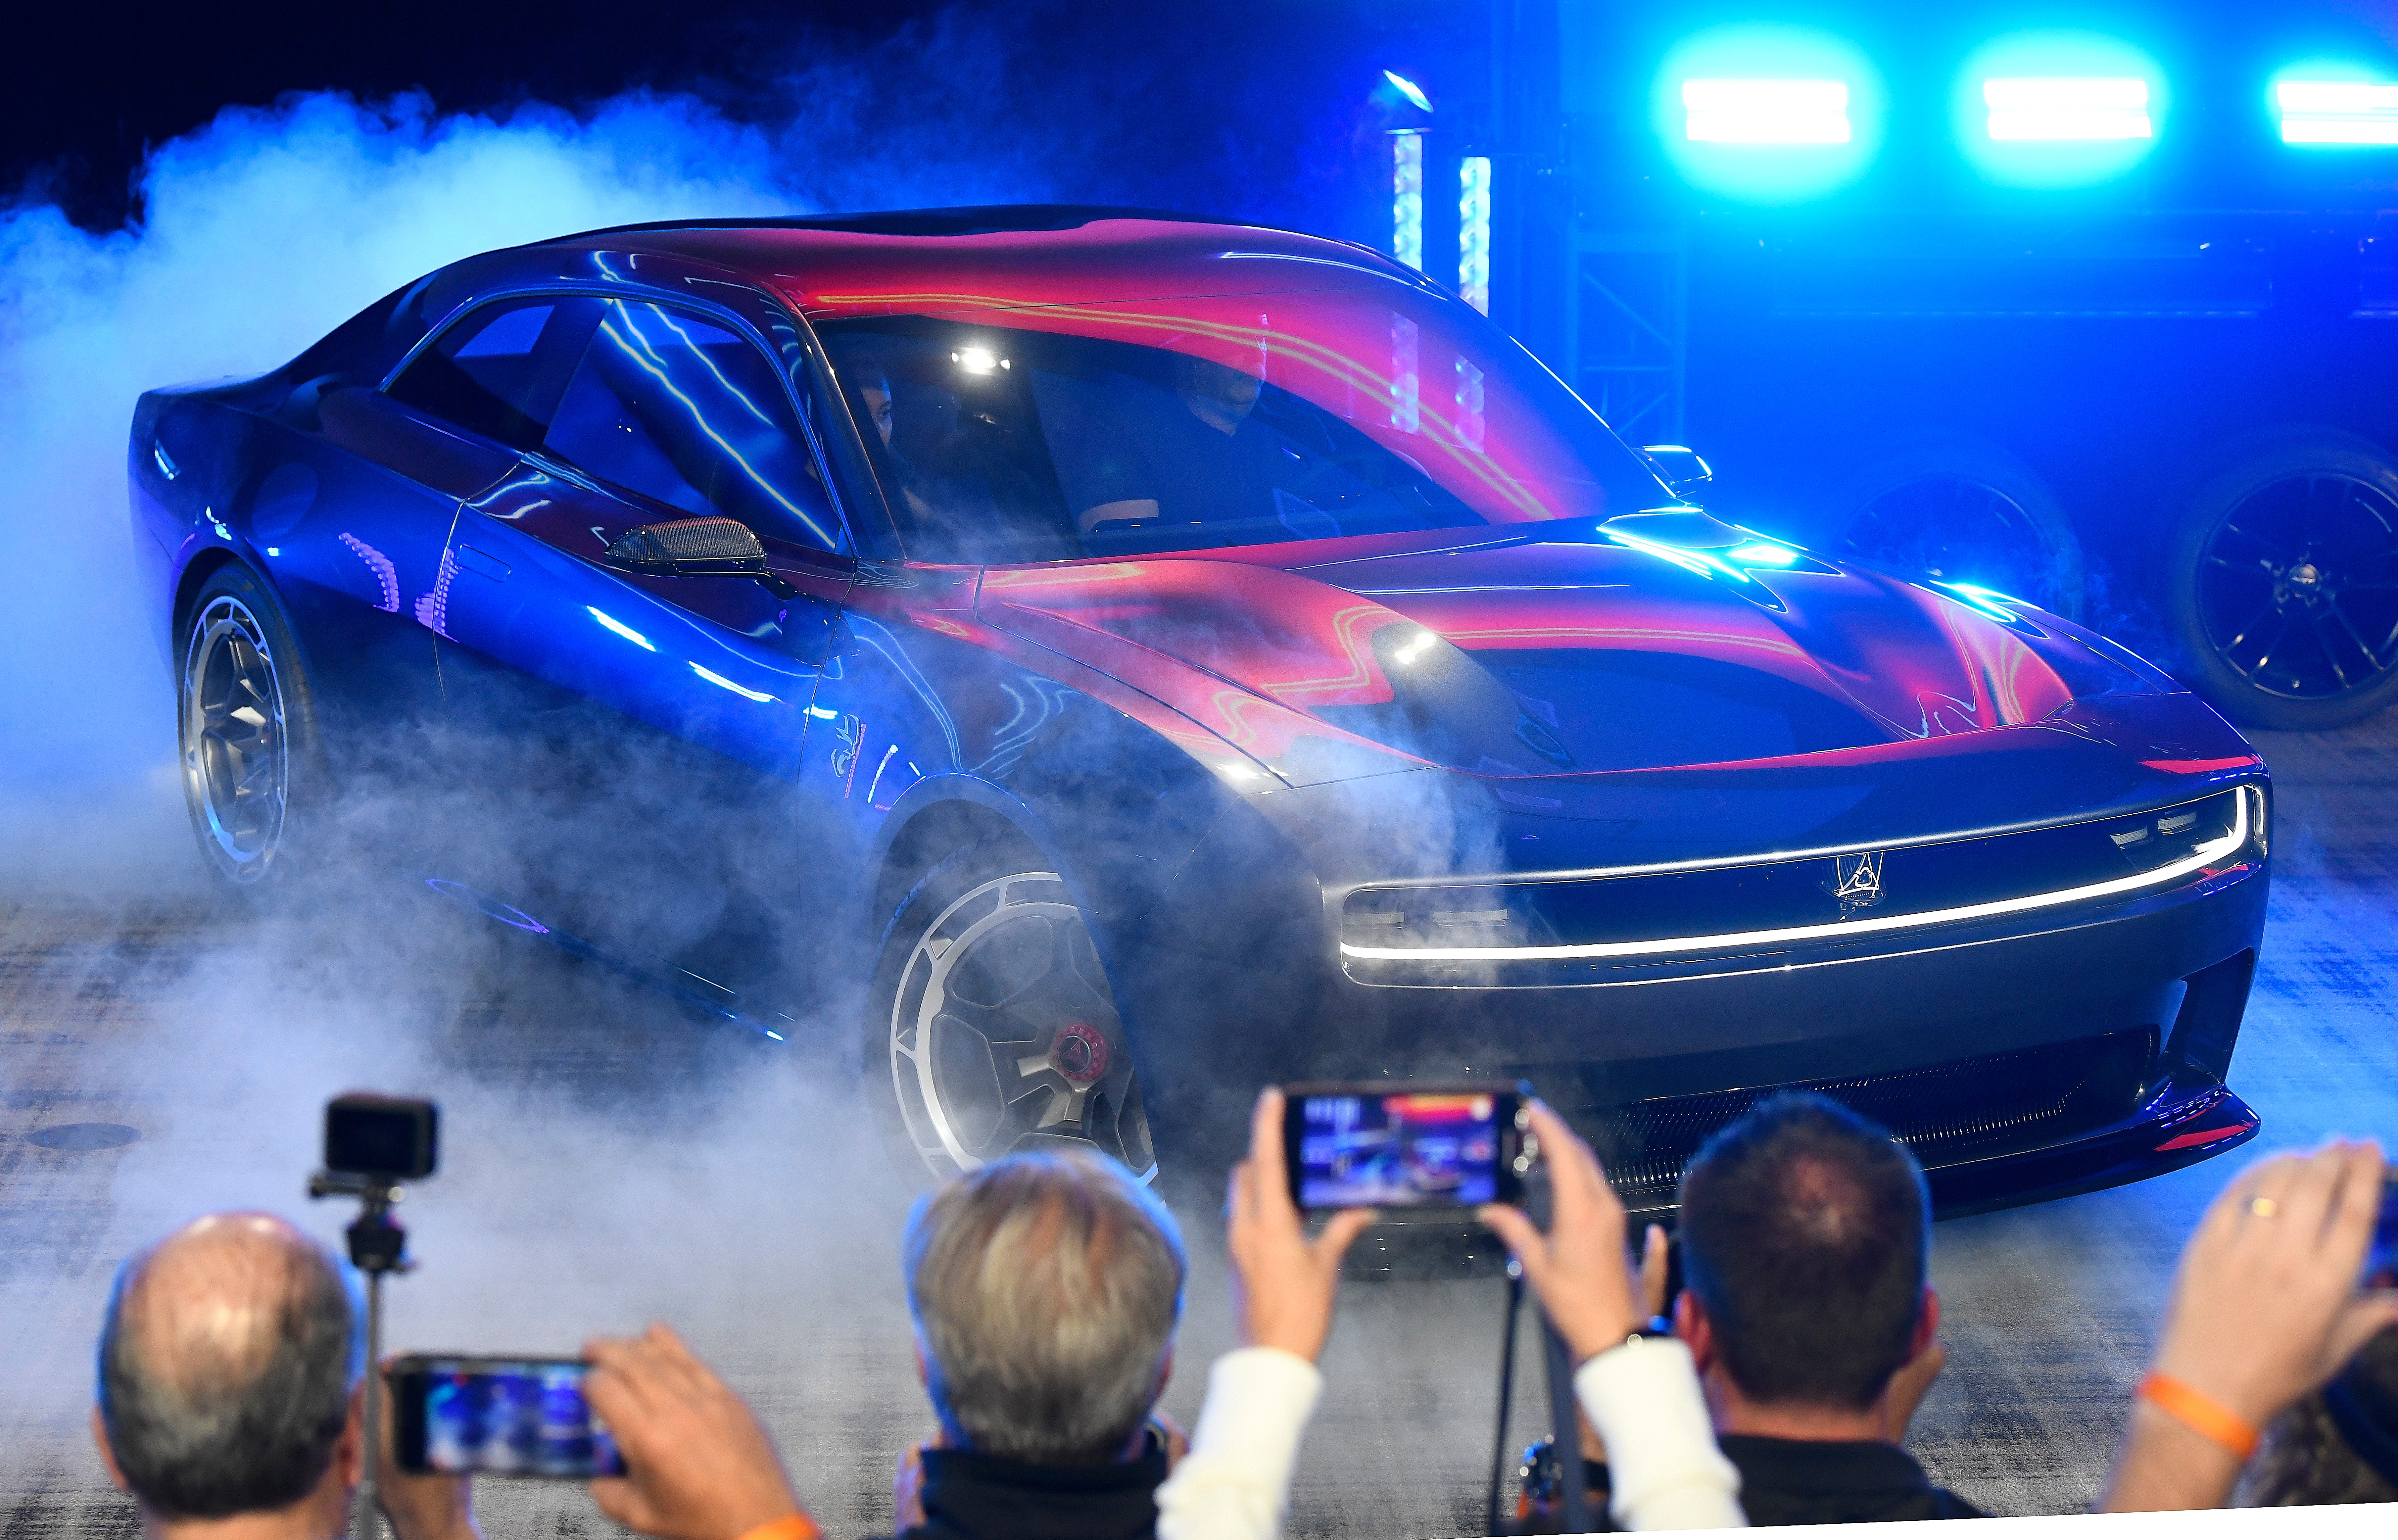 Meet the Daytona SRT Banshee concept, a preview of Dodge's electric muscle future